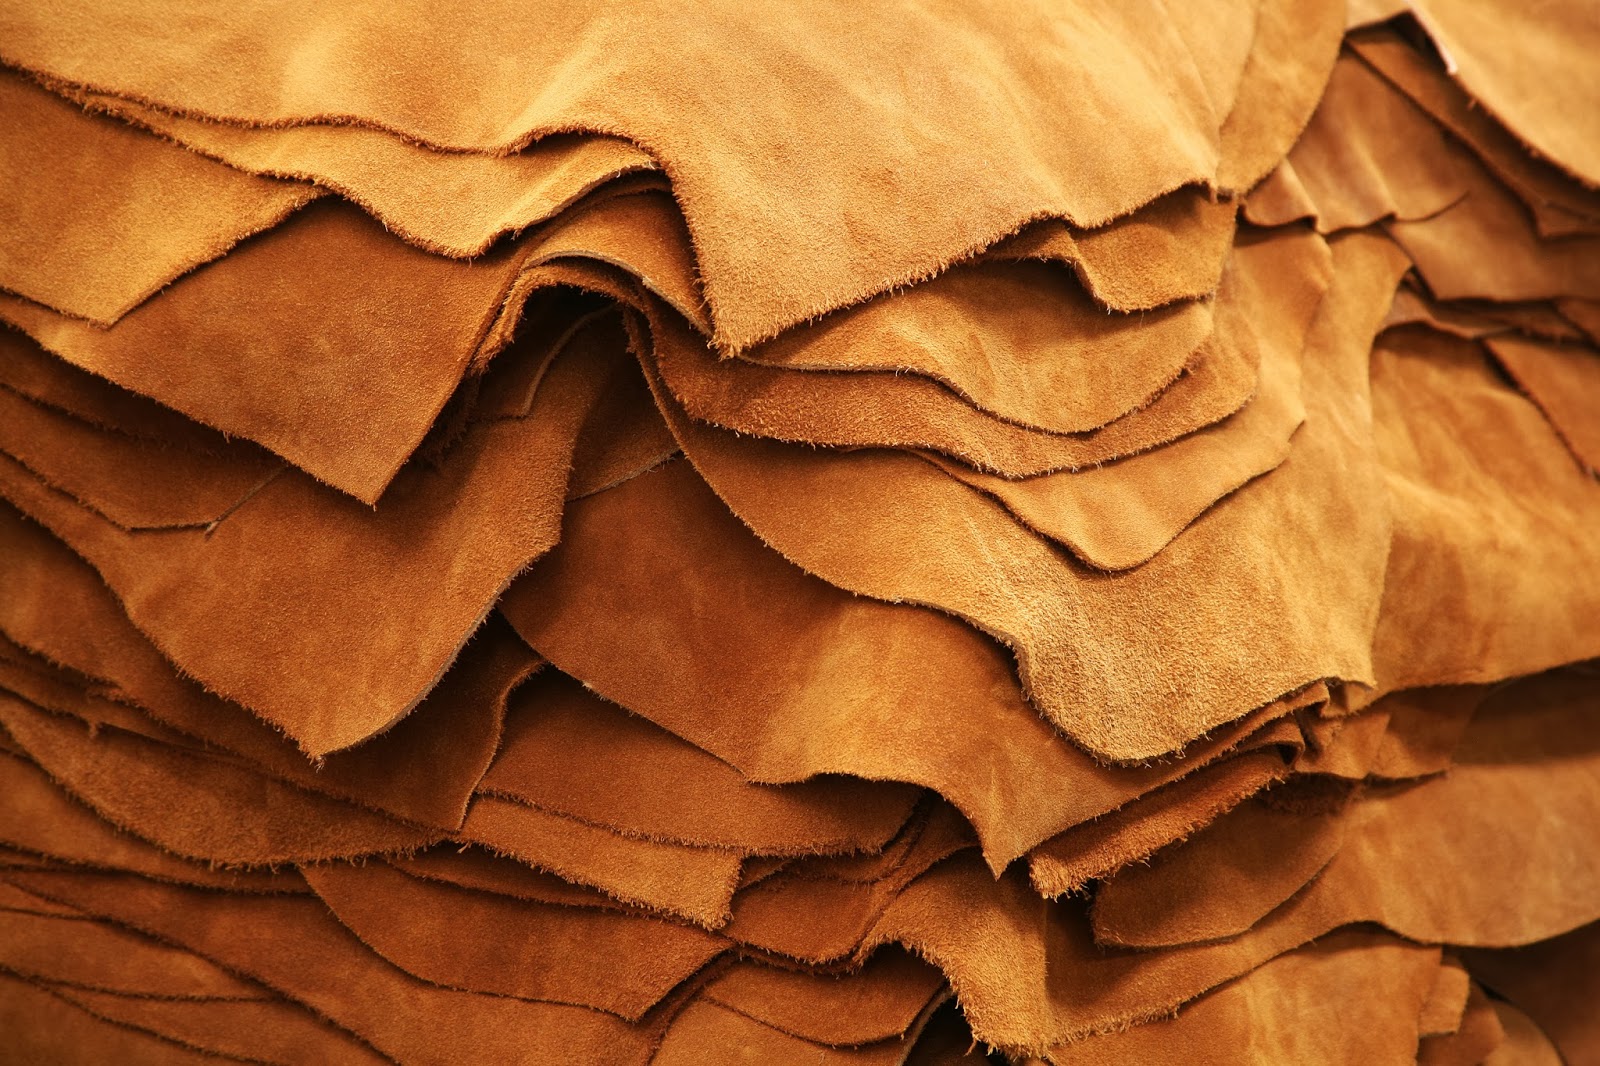 Leather-making: The horrifying facts and green solutions